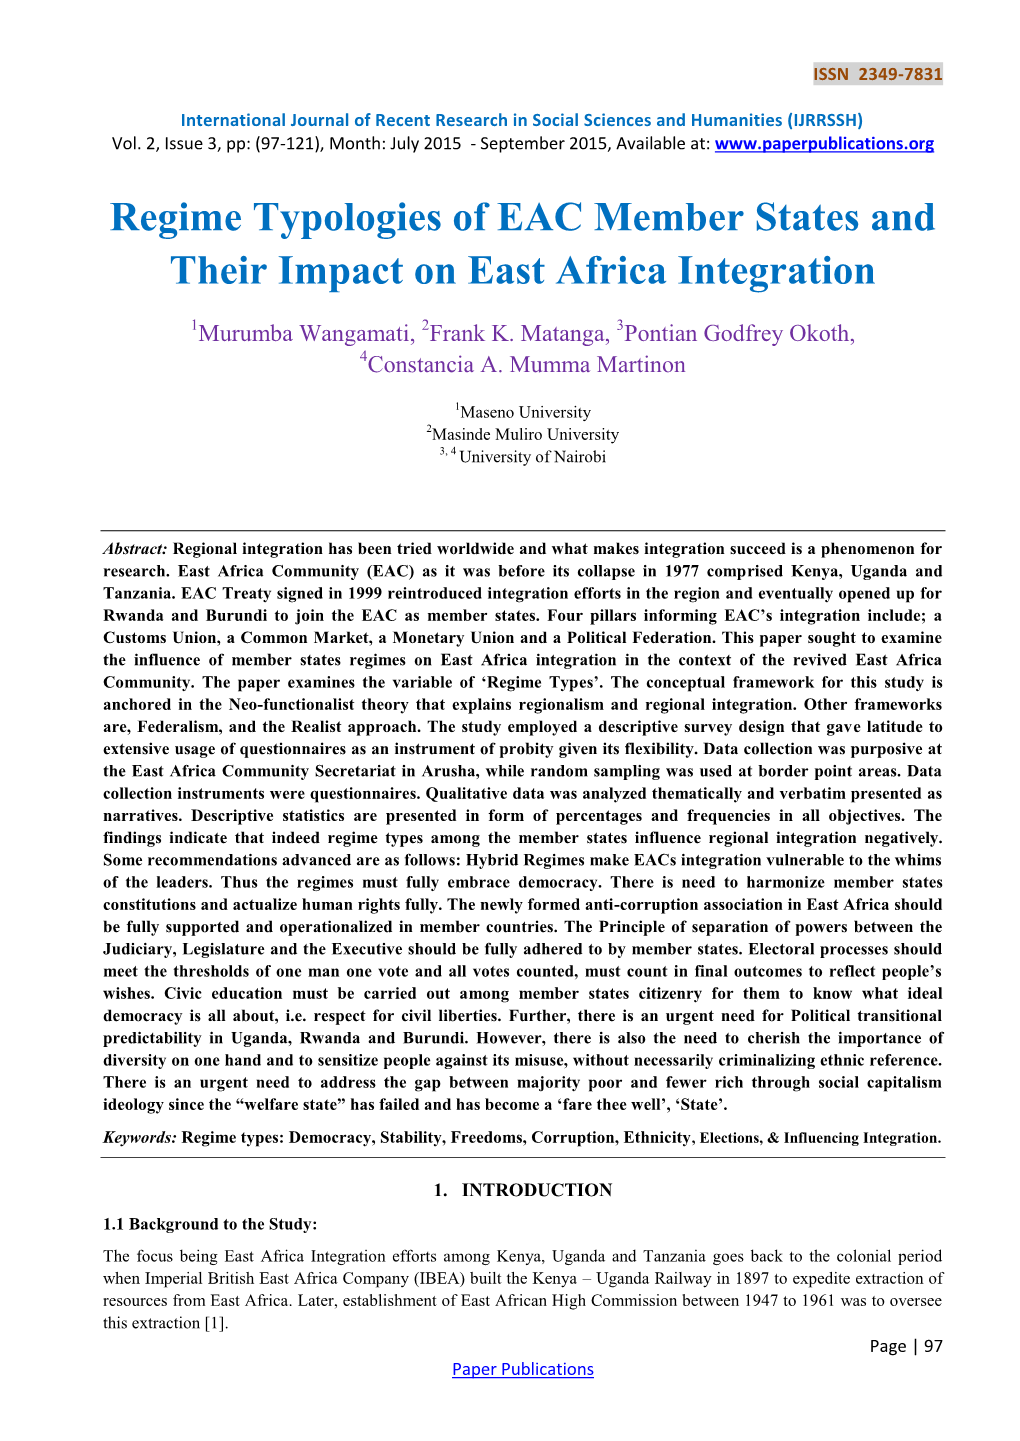 Regime Typologies of EAC Member States and Their Impact on East Africa Integration